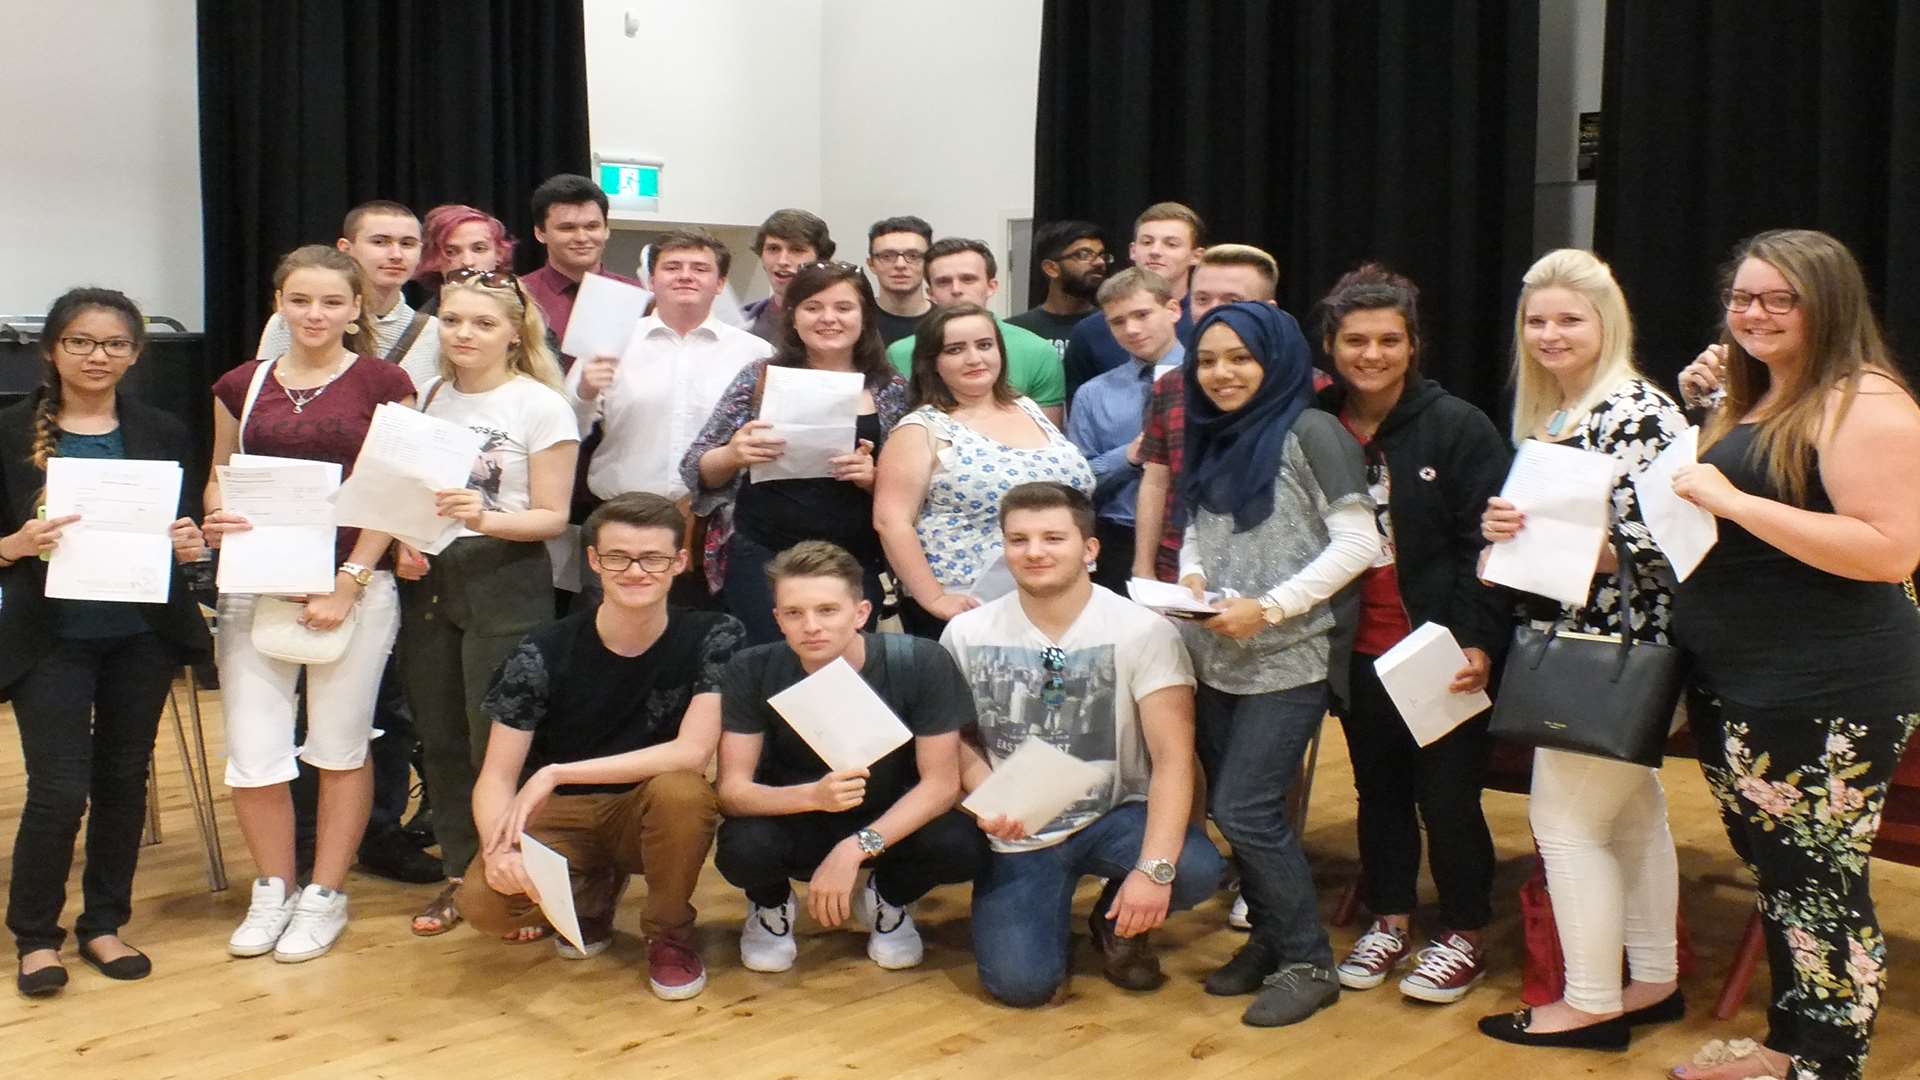 Students at St George's School with their results